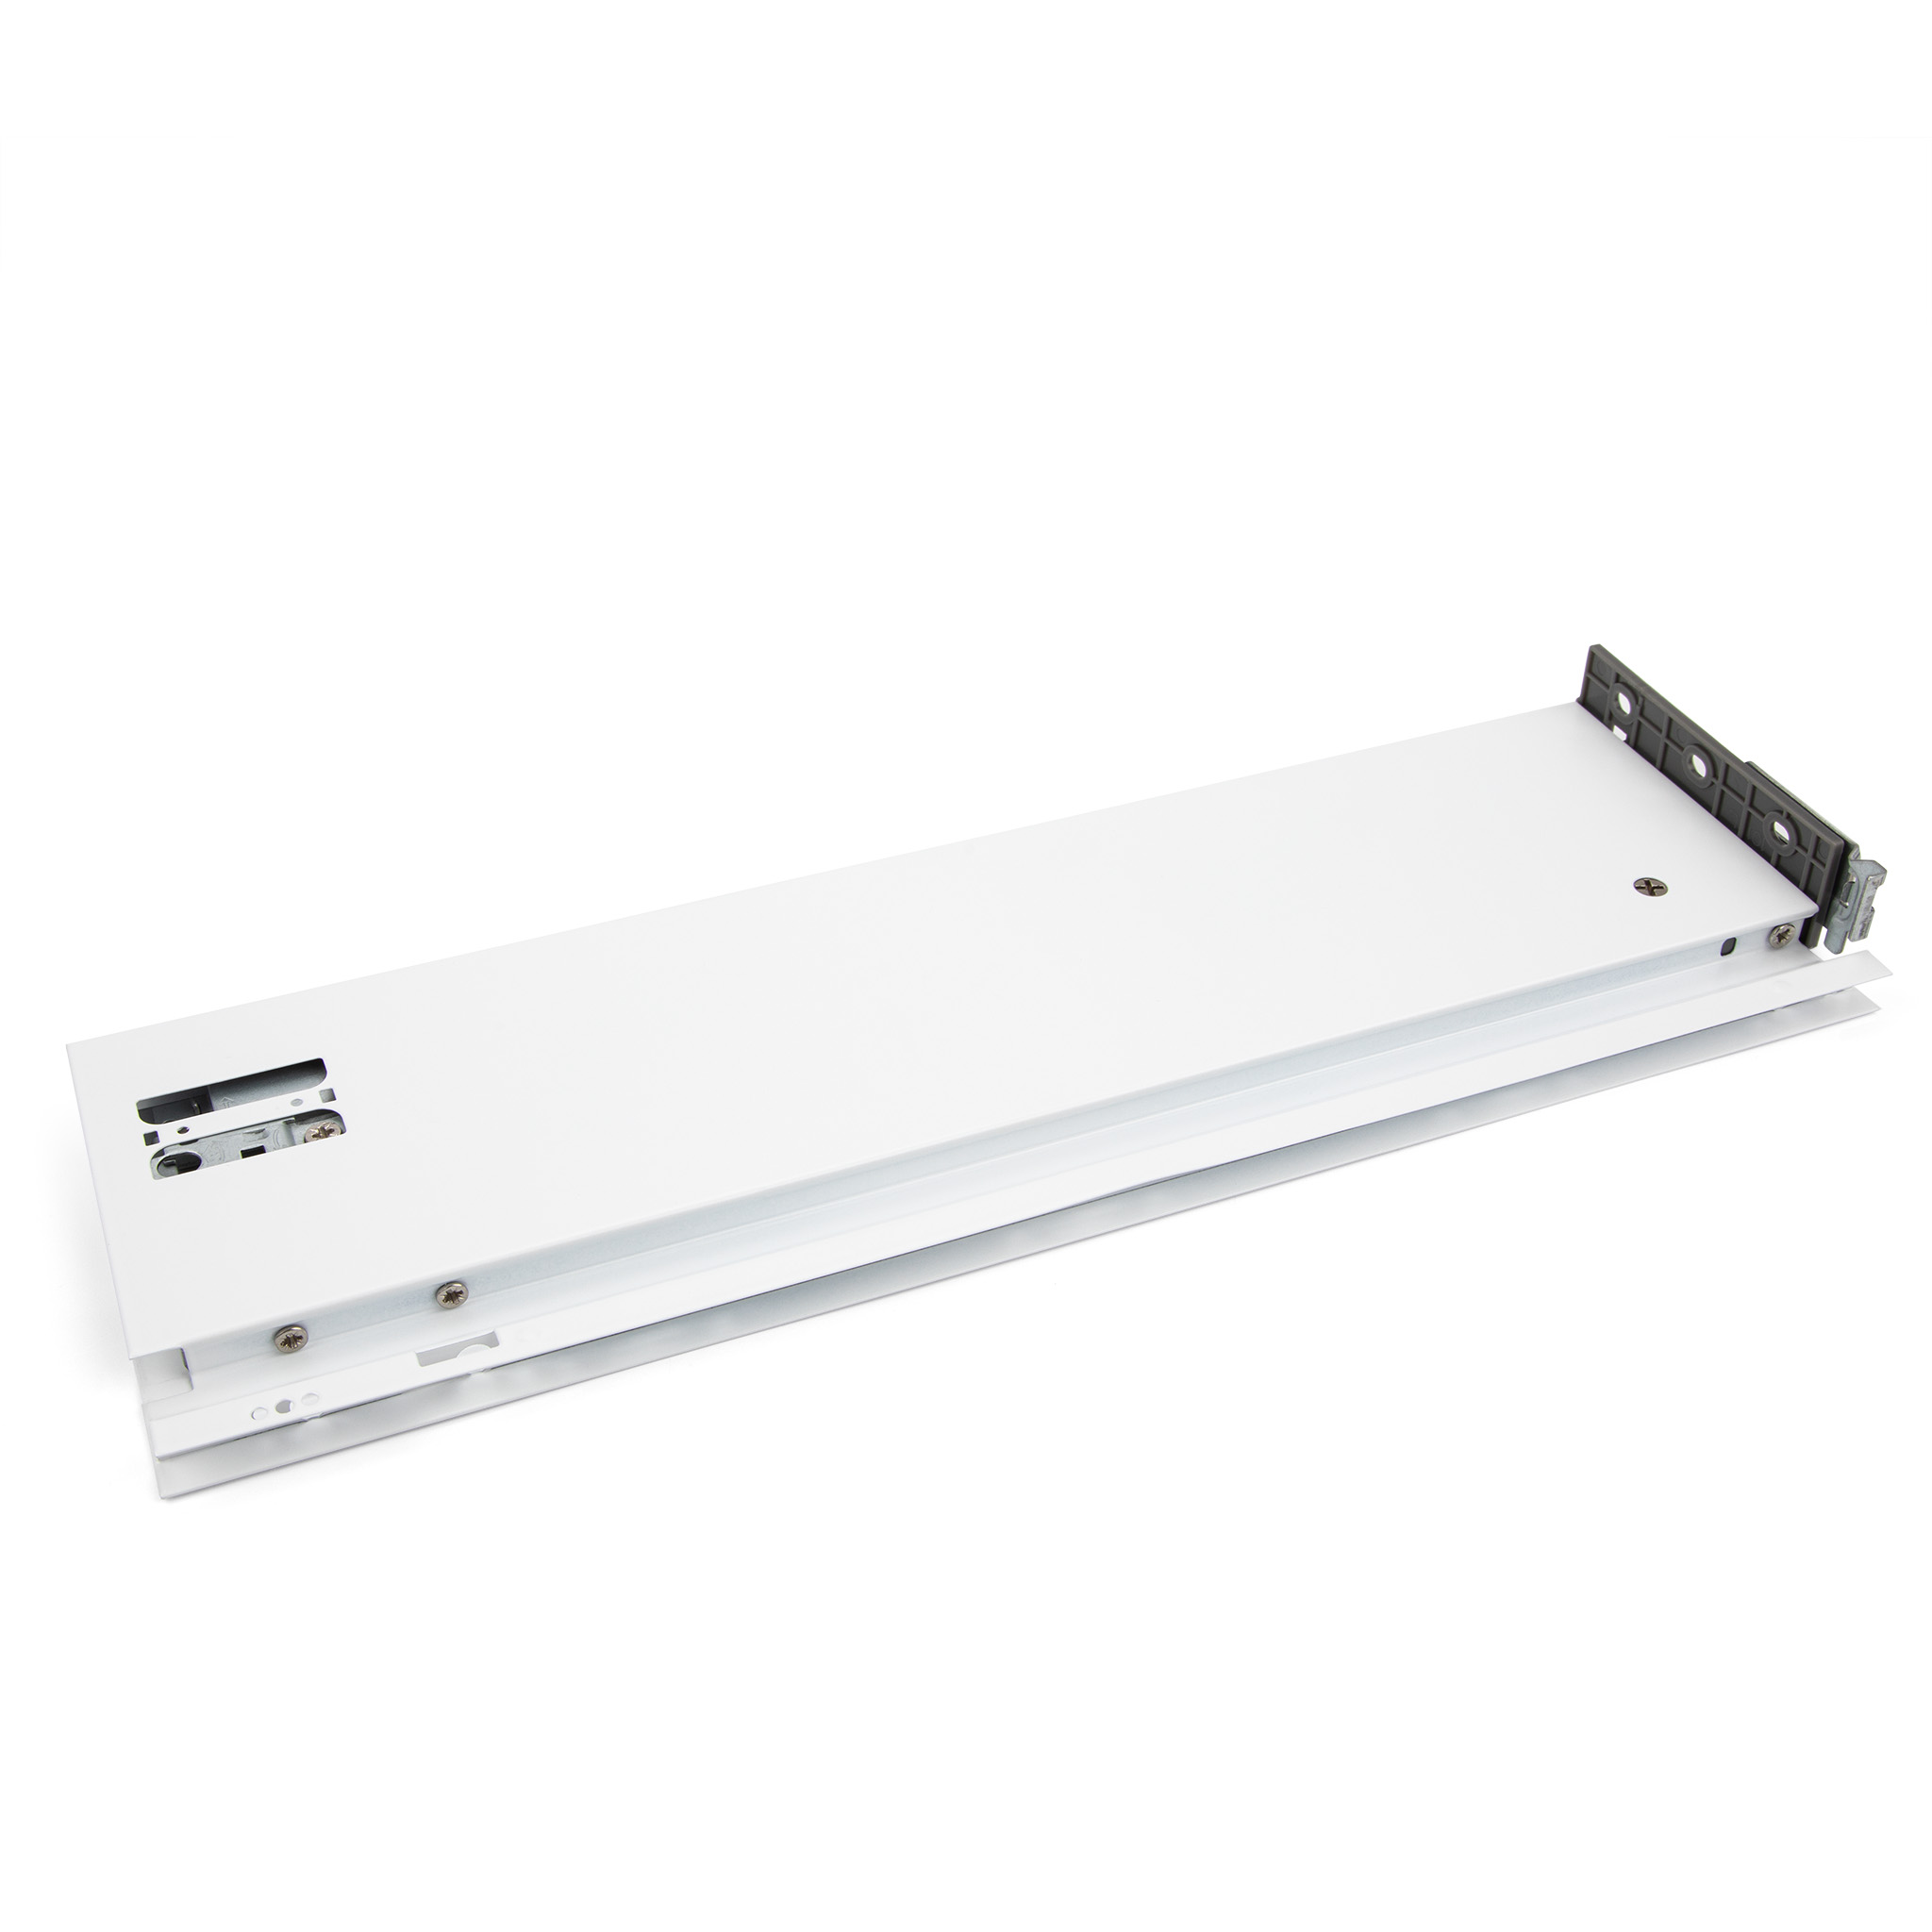 M-Series Fusion Side Wall, 270mm Length, 126mm Height, Lunar White